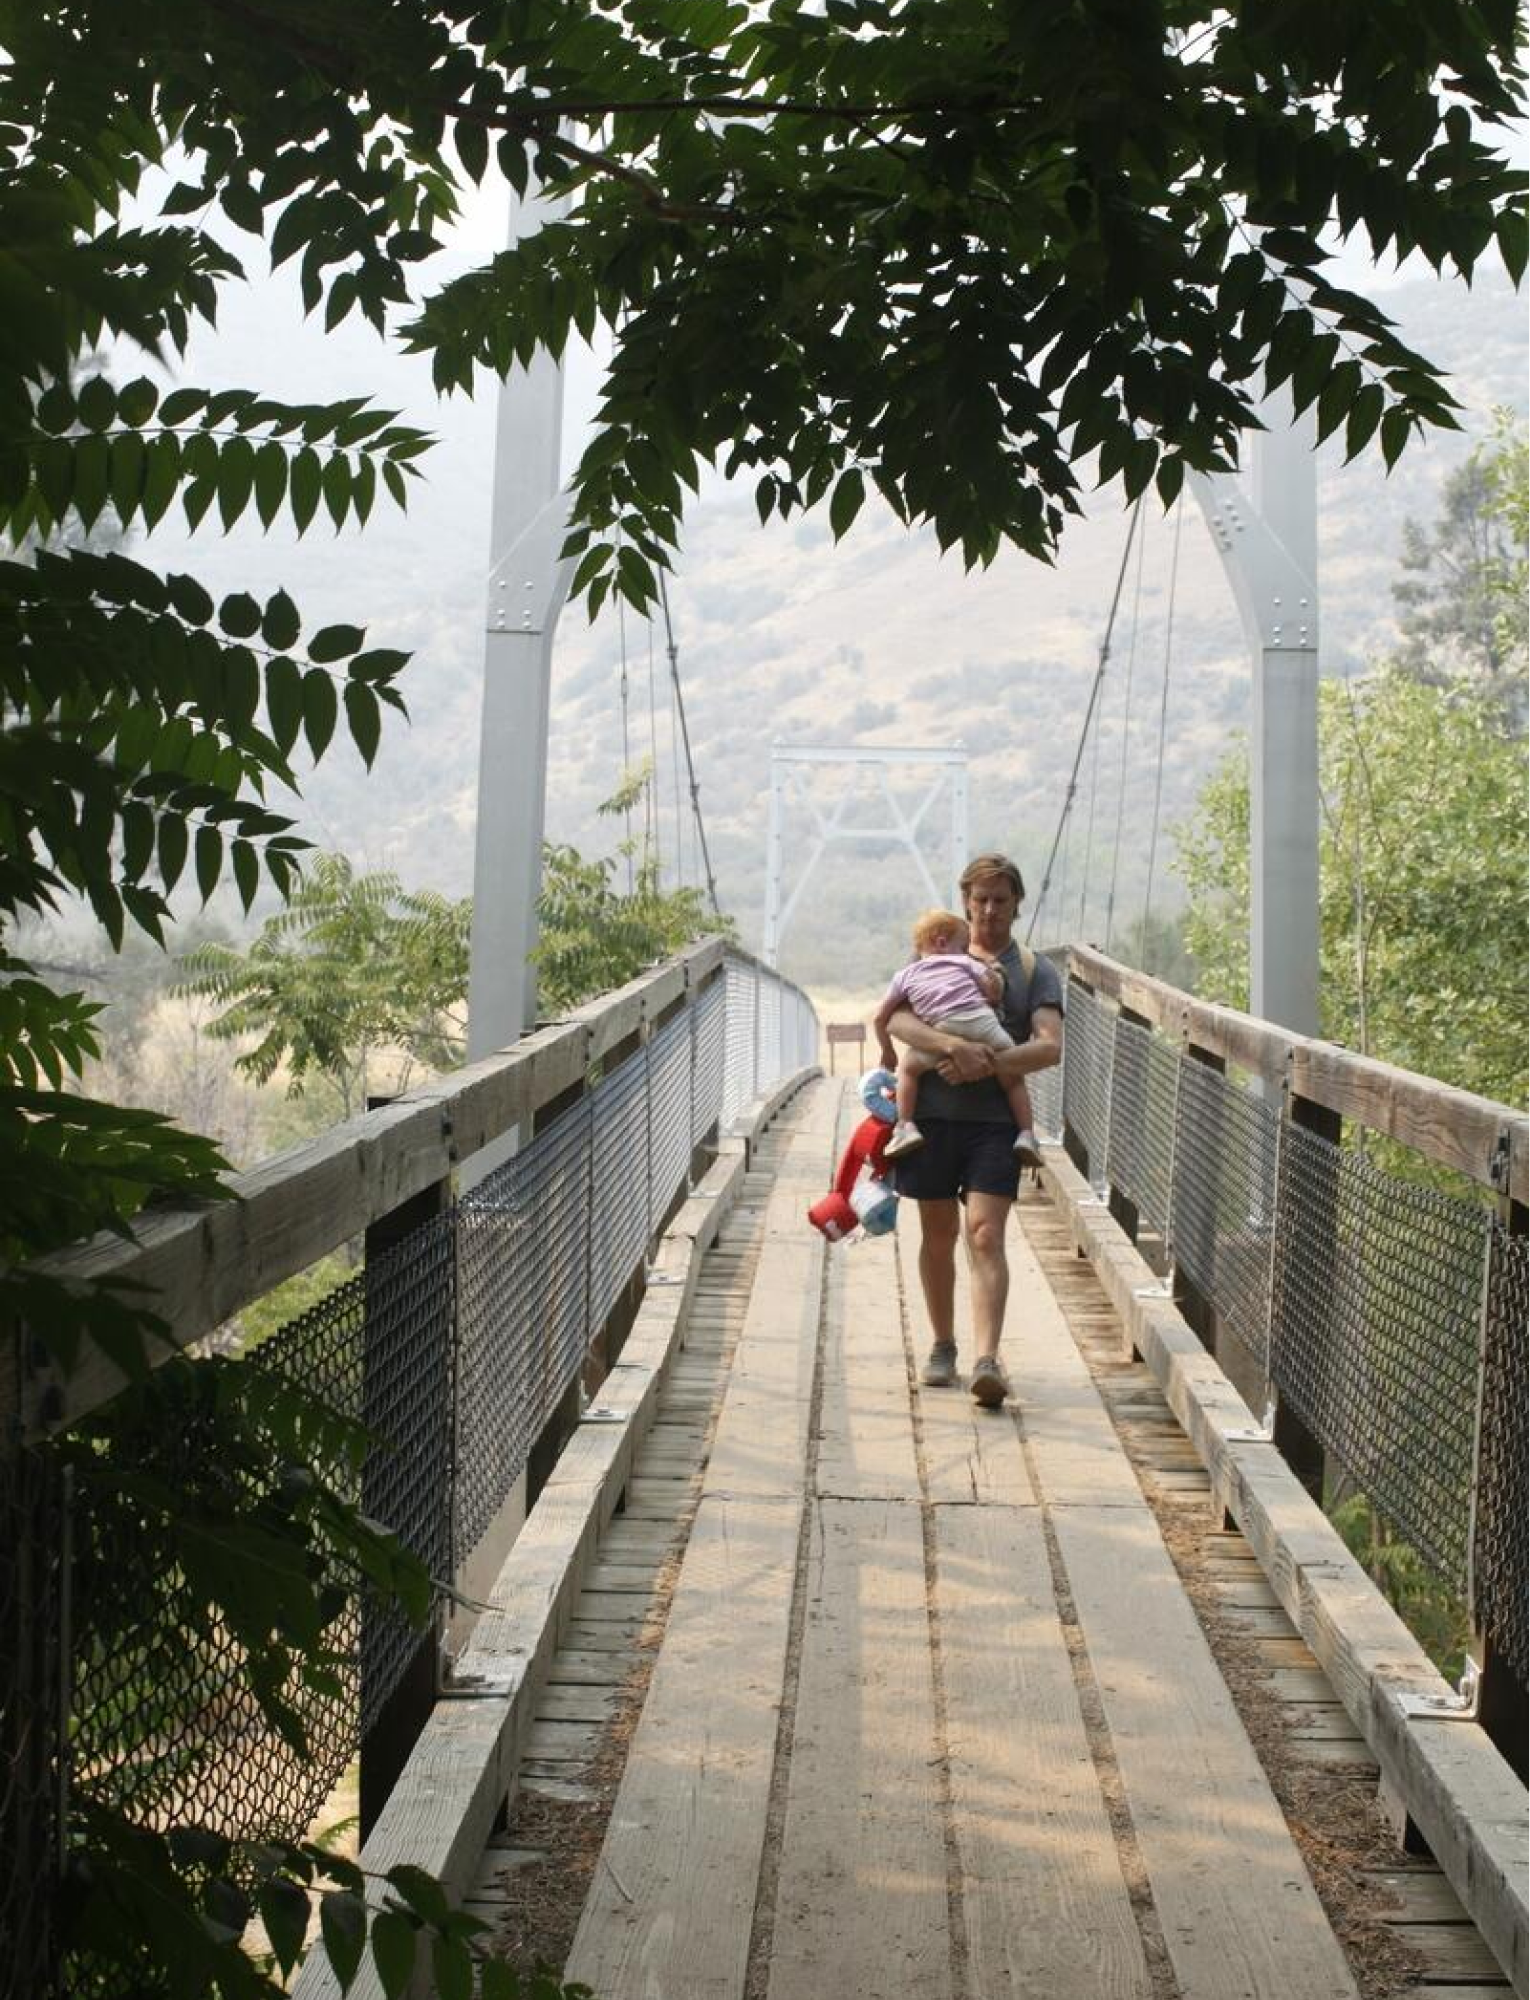 A man walks across a footbridge holding a small child in his arms.